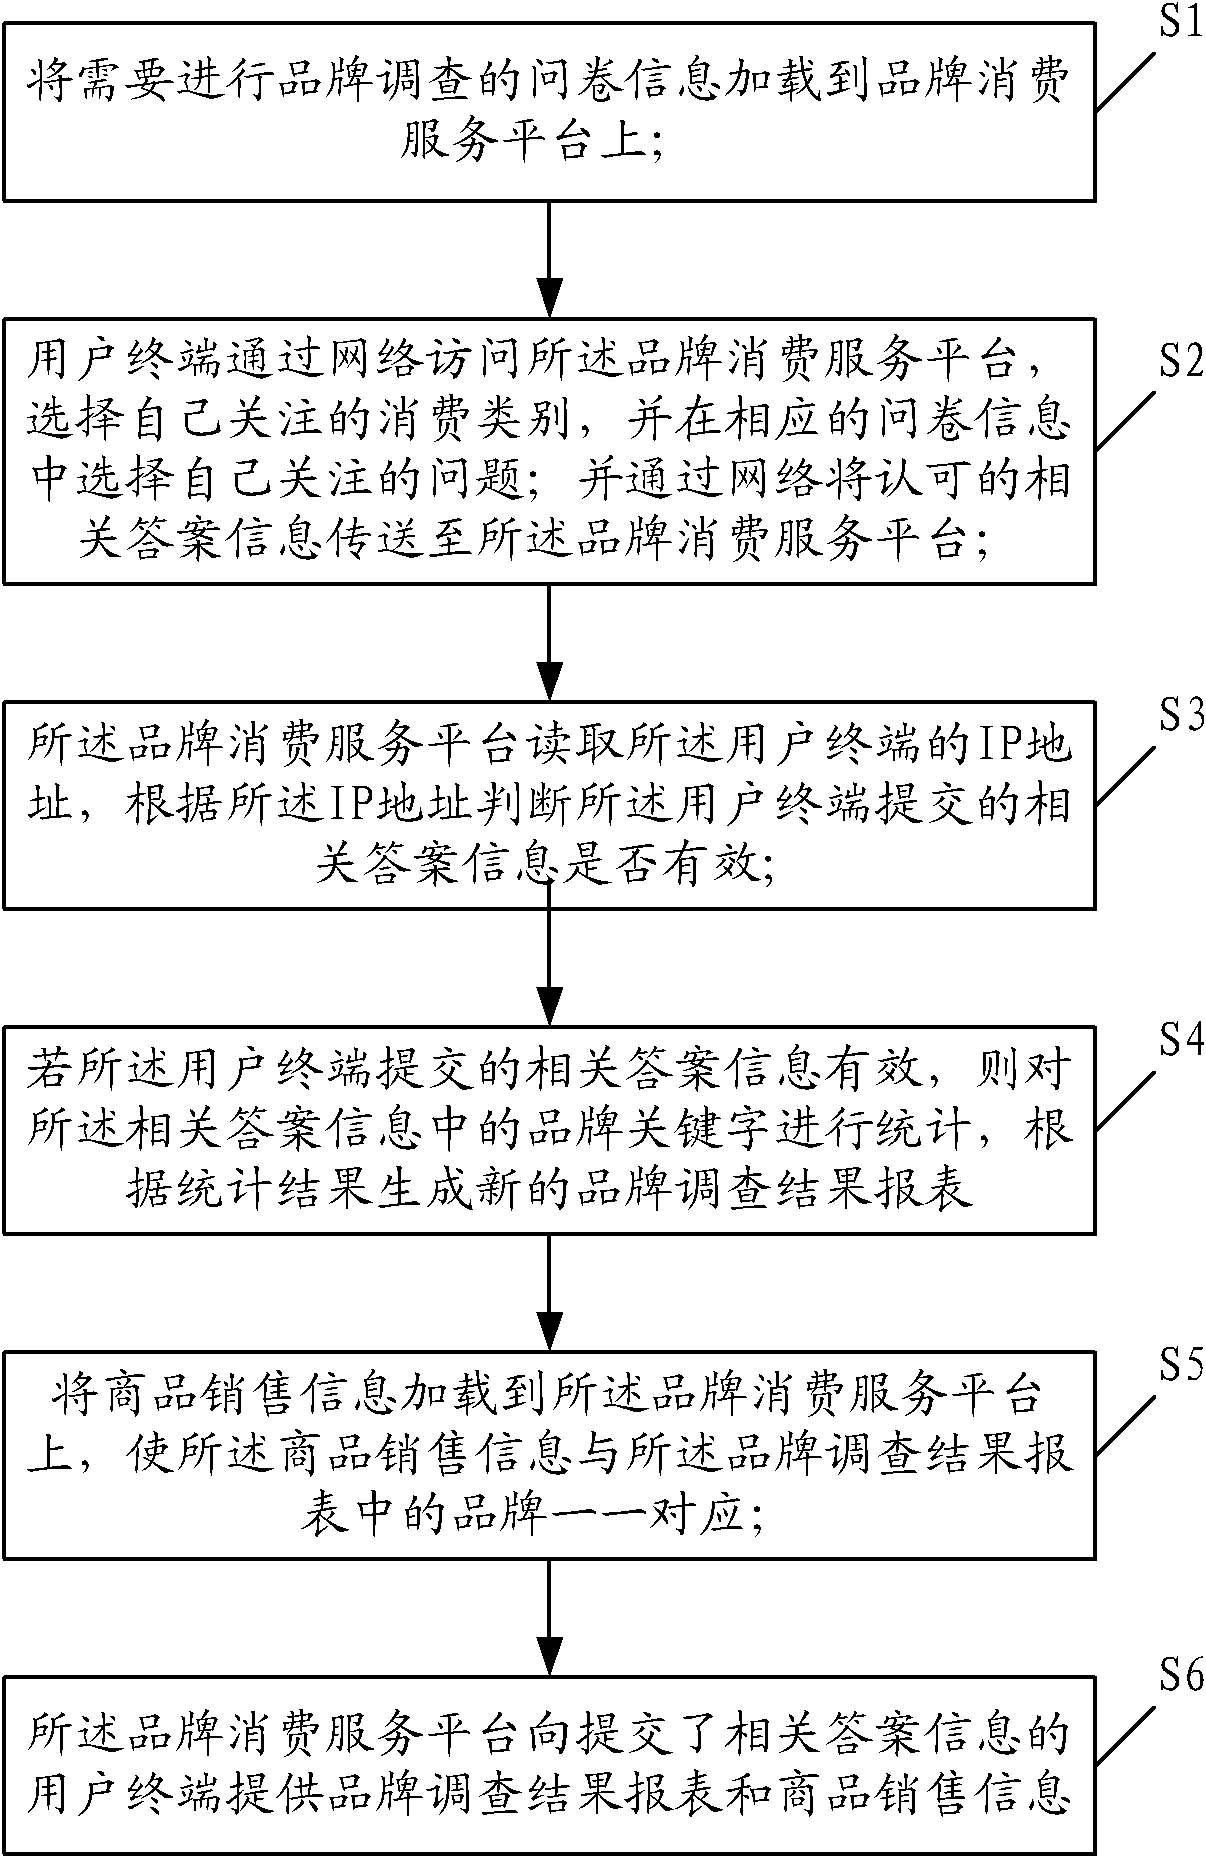 Method and system for obtaining brand sequence and guiding brand consumption by Internet survey